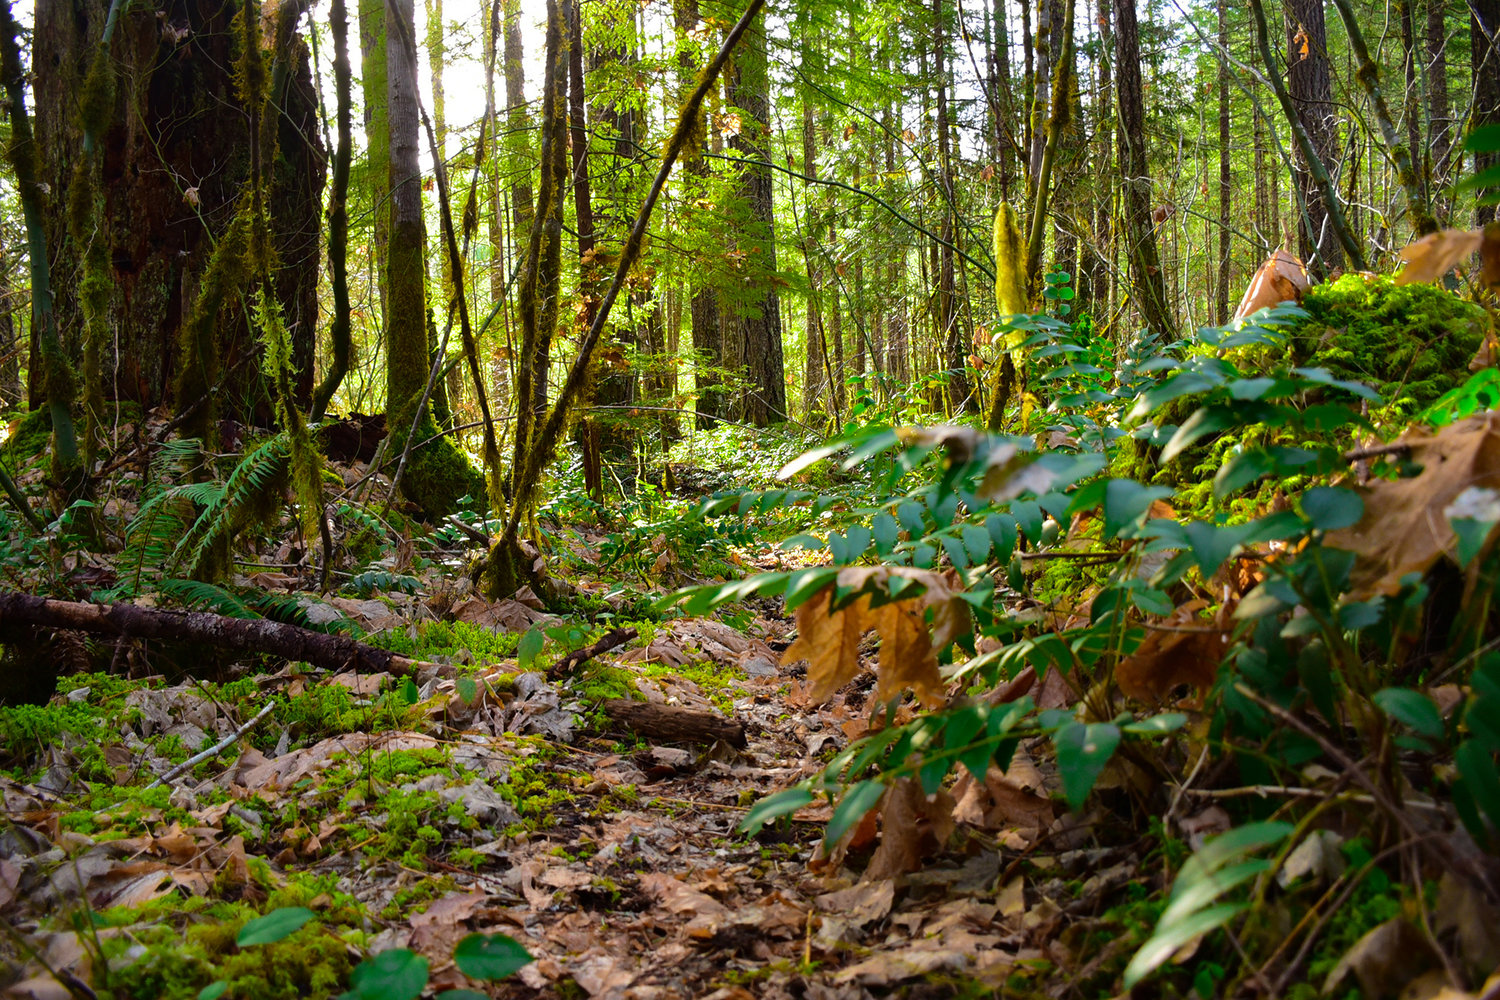 Washington State Parks owns 175 acres of forest in Packwood near the confluence of Skate Creek and the Cowlitz River.